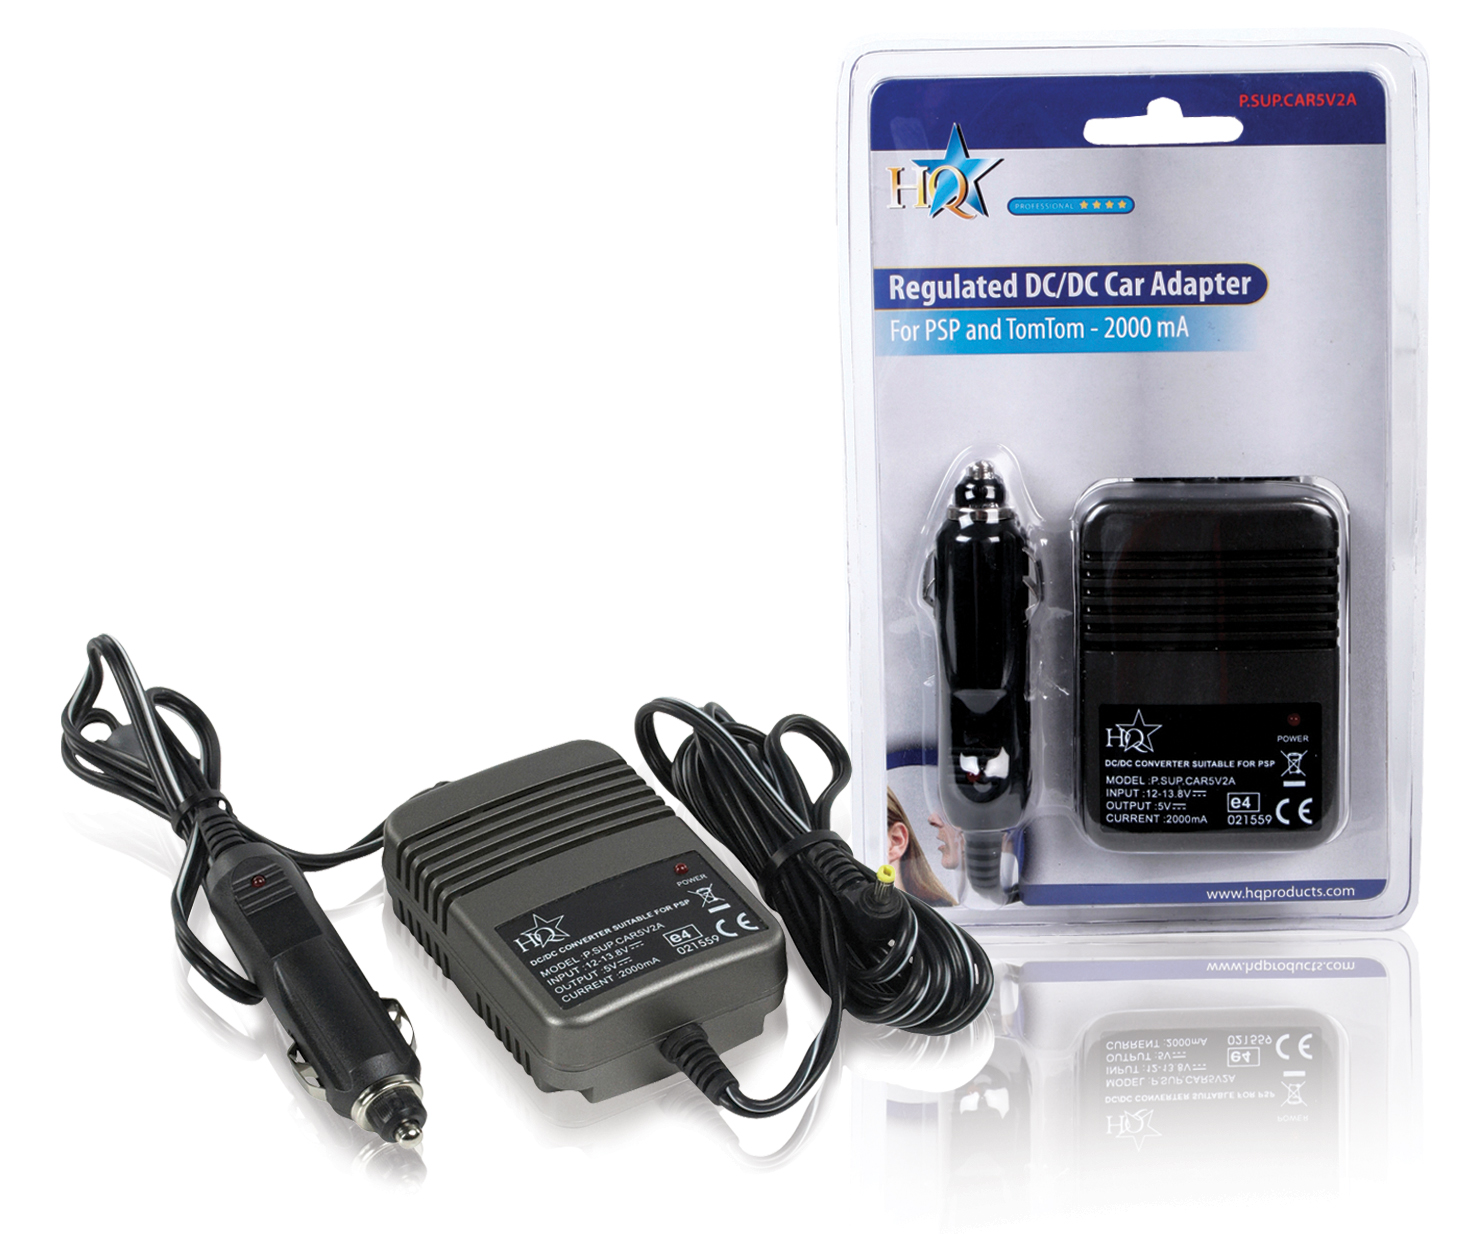 HQ P.SUP.CAR5V2A Car adapter for Tomtom and PSP